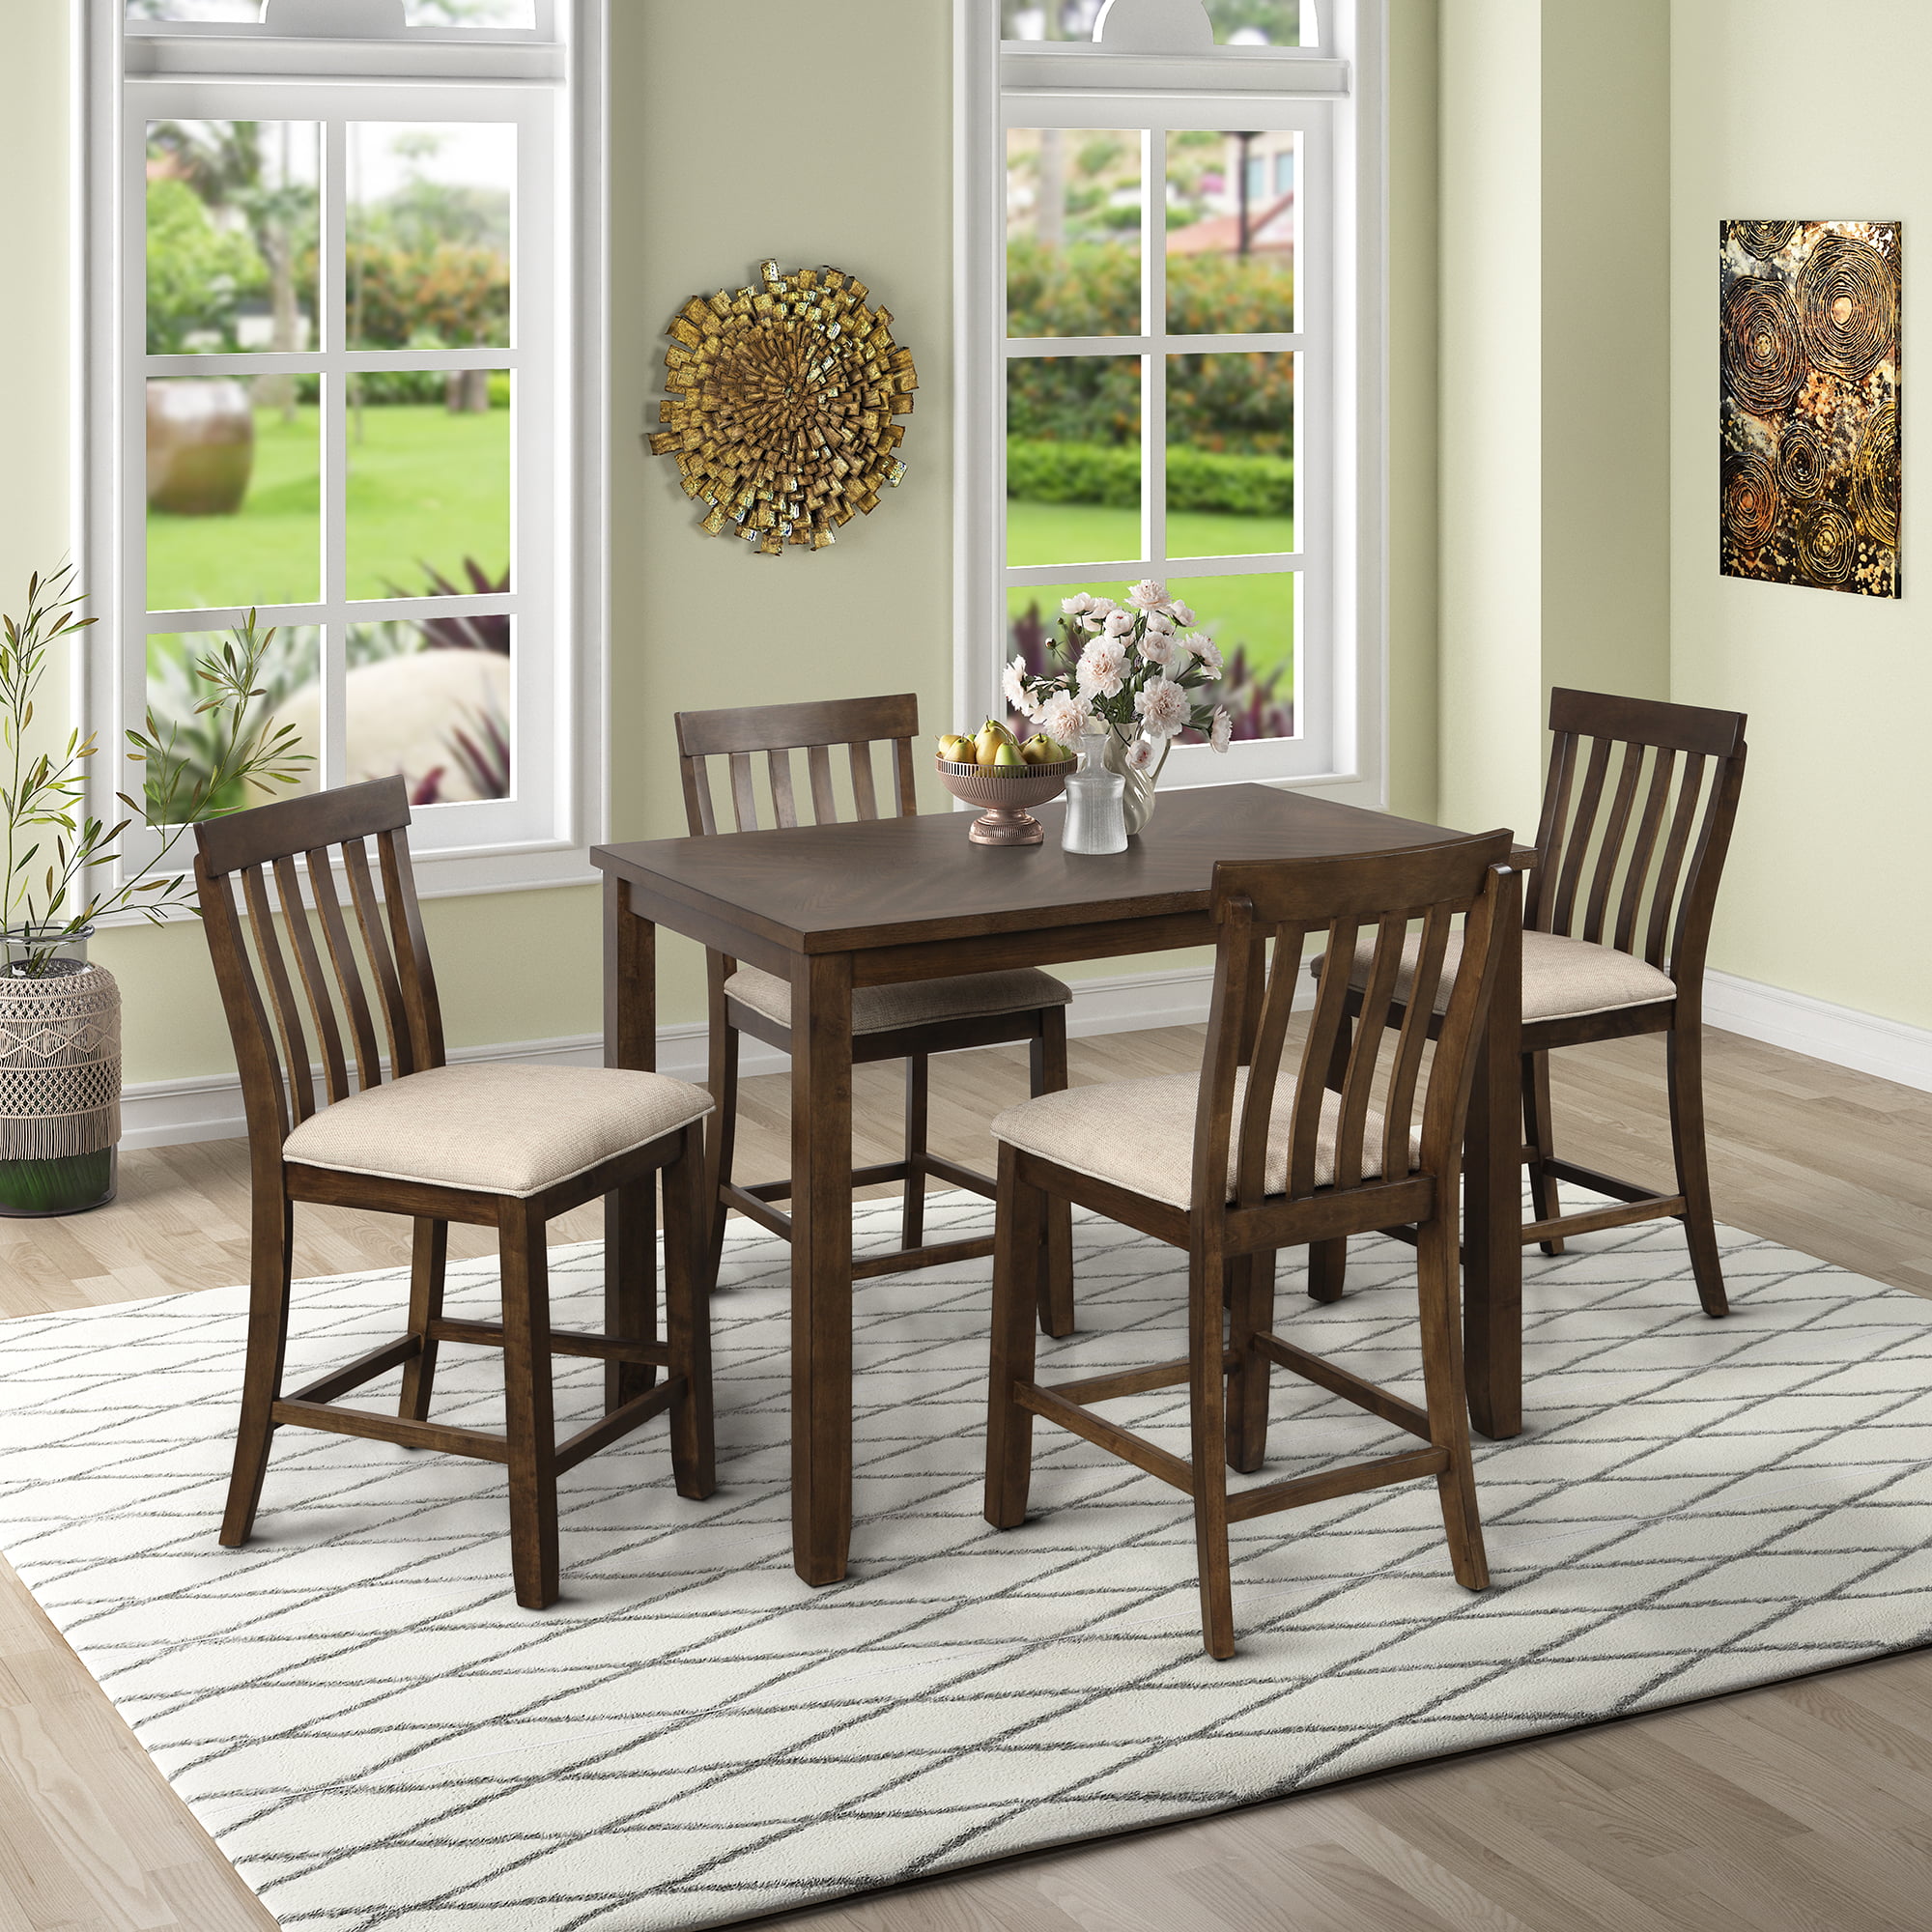 Btmway Wood Kitchen Dining Room Table, Counter Height Dining Room Table And Chair Sets